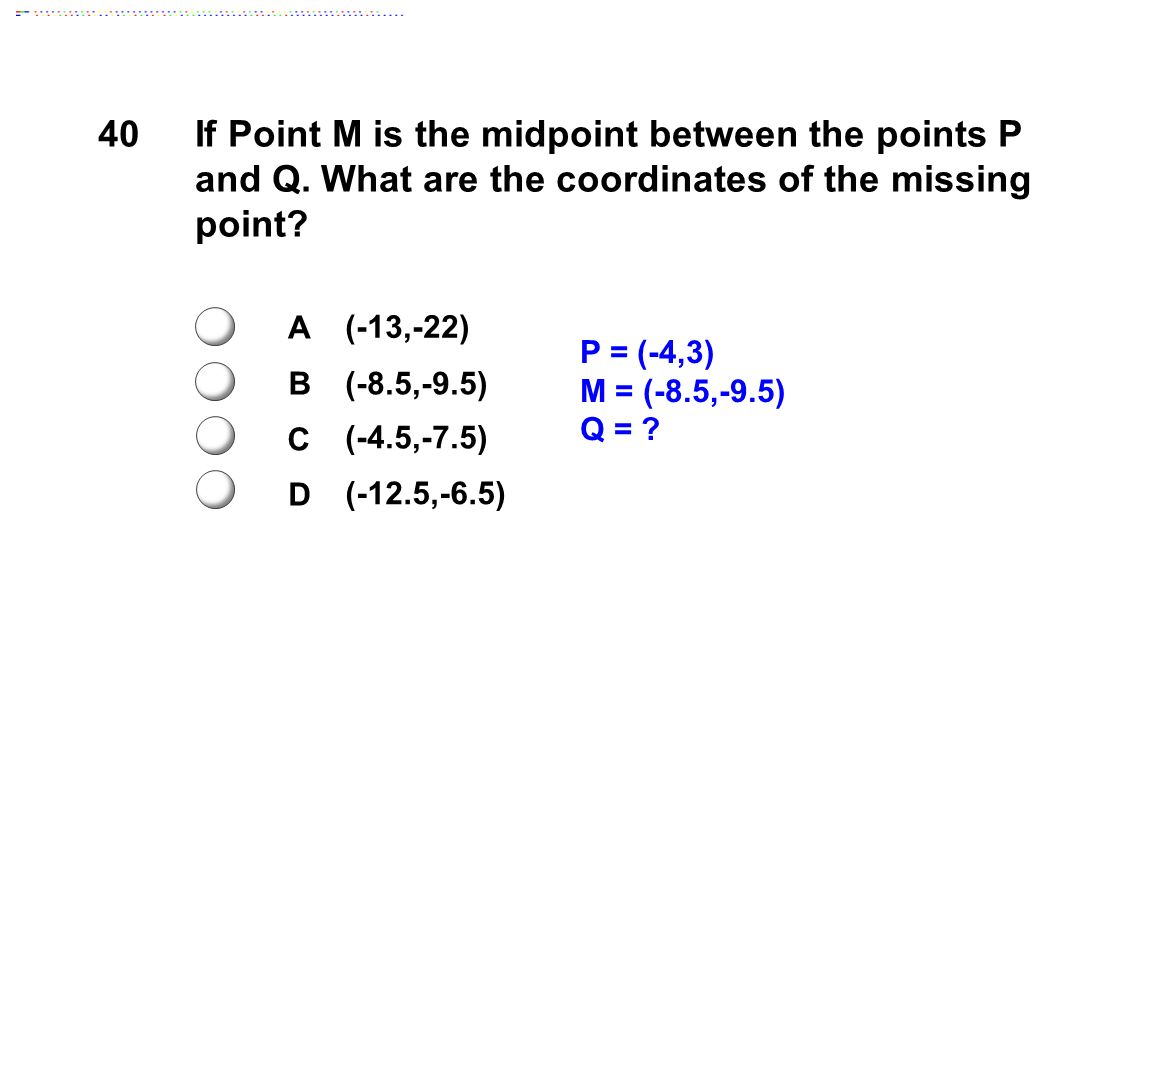 40If Point M is the midpoint between the points P and Q.